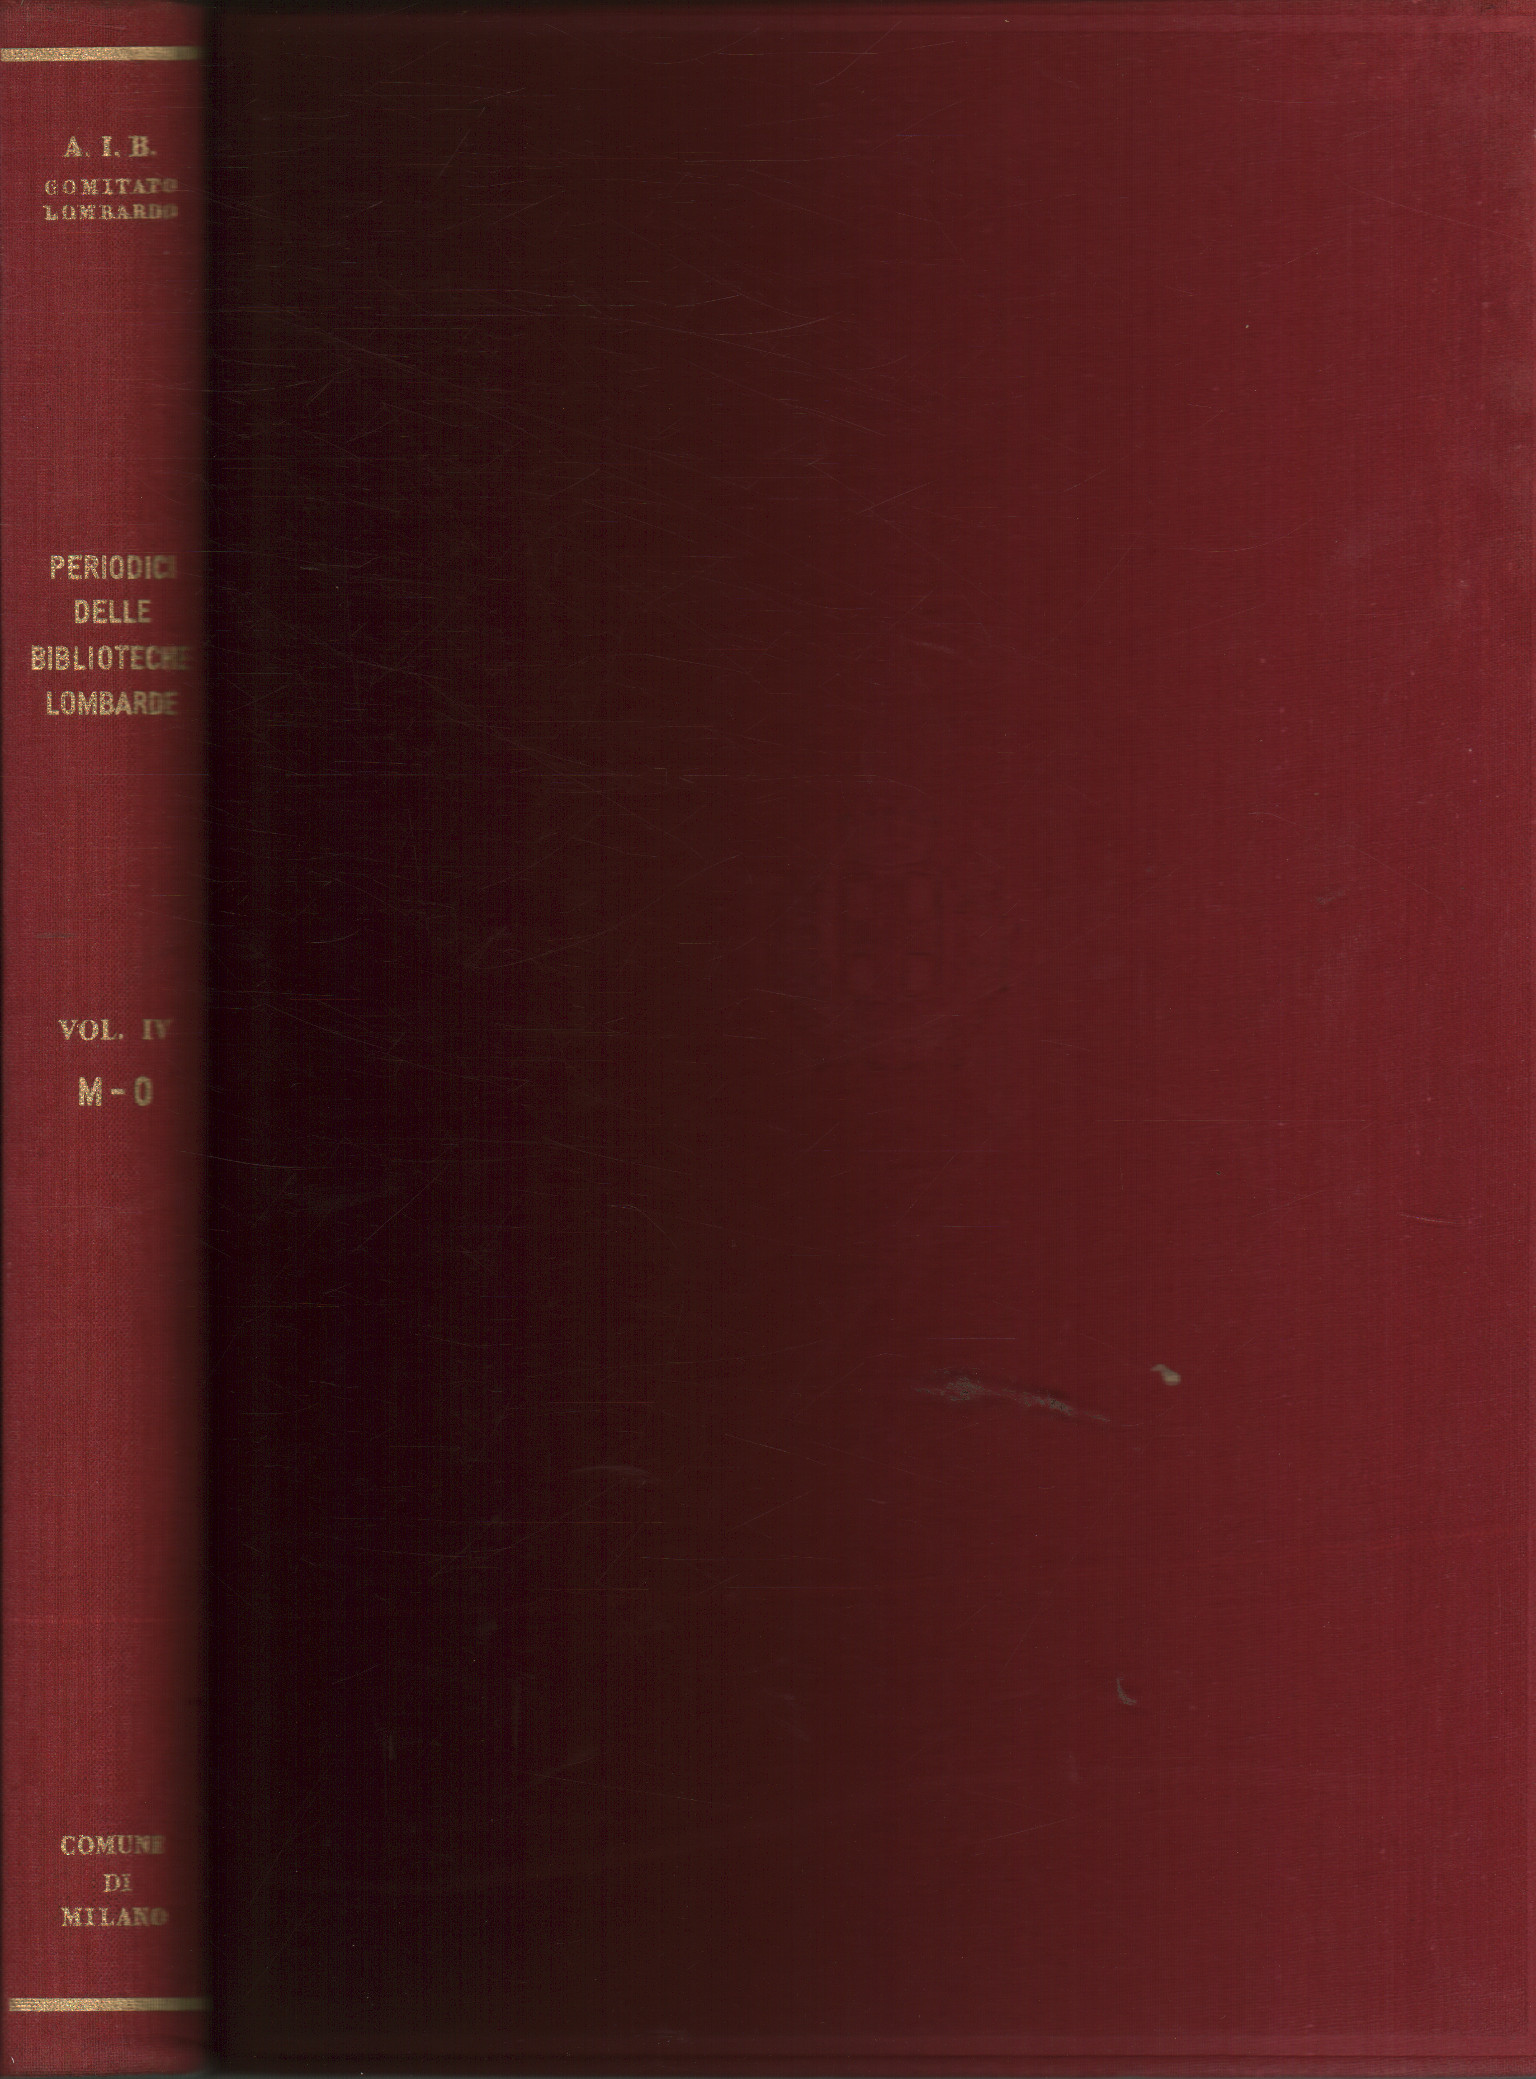 Catalog of periodicals of Lombard libraries., AA.VV